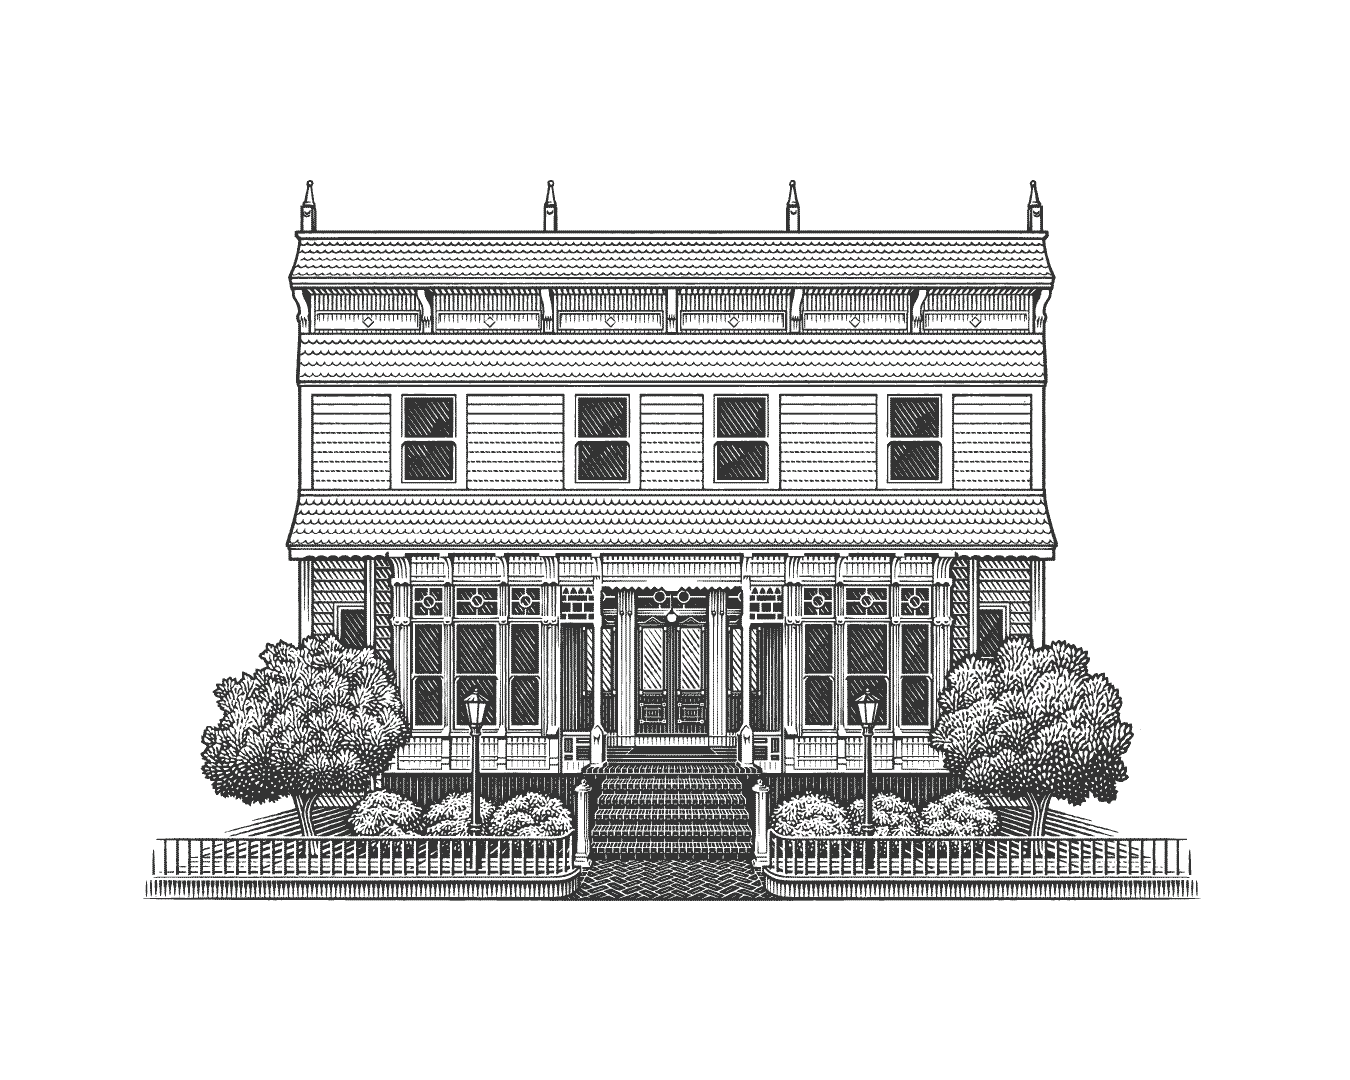 Garden Street Inn architectural architecture black and white building engraving hospitality hotel illustration line art line work scraperboard scratchboard wood engraving woodcut